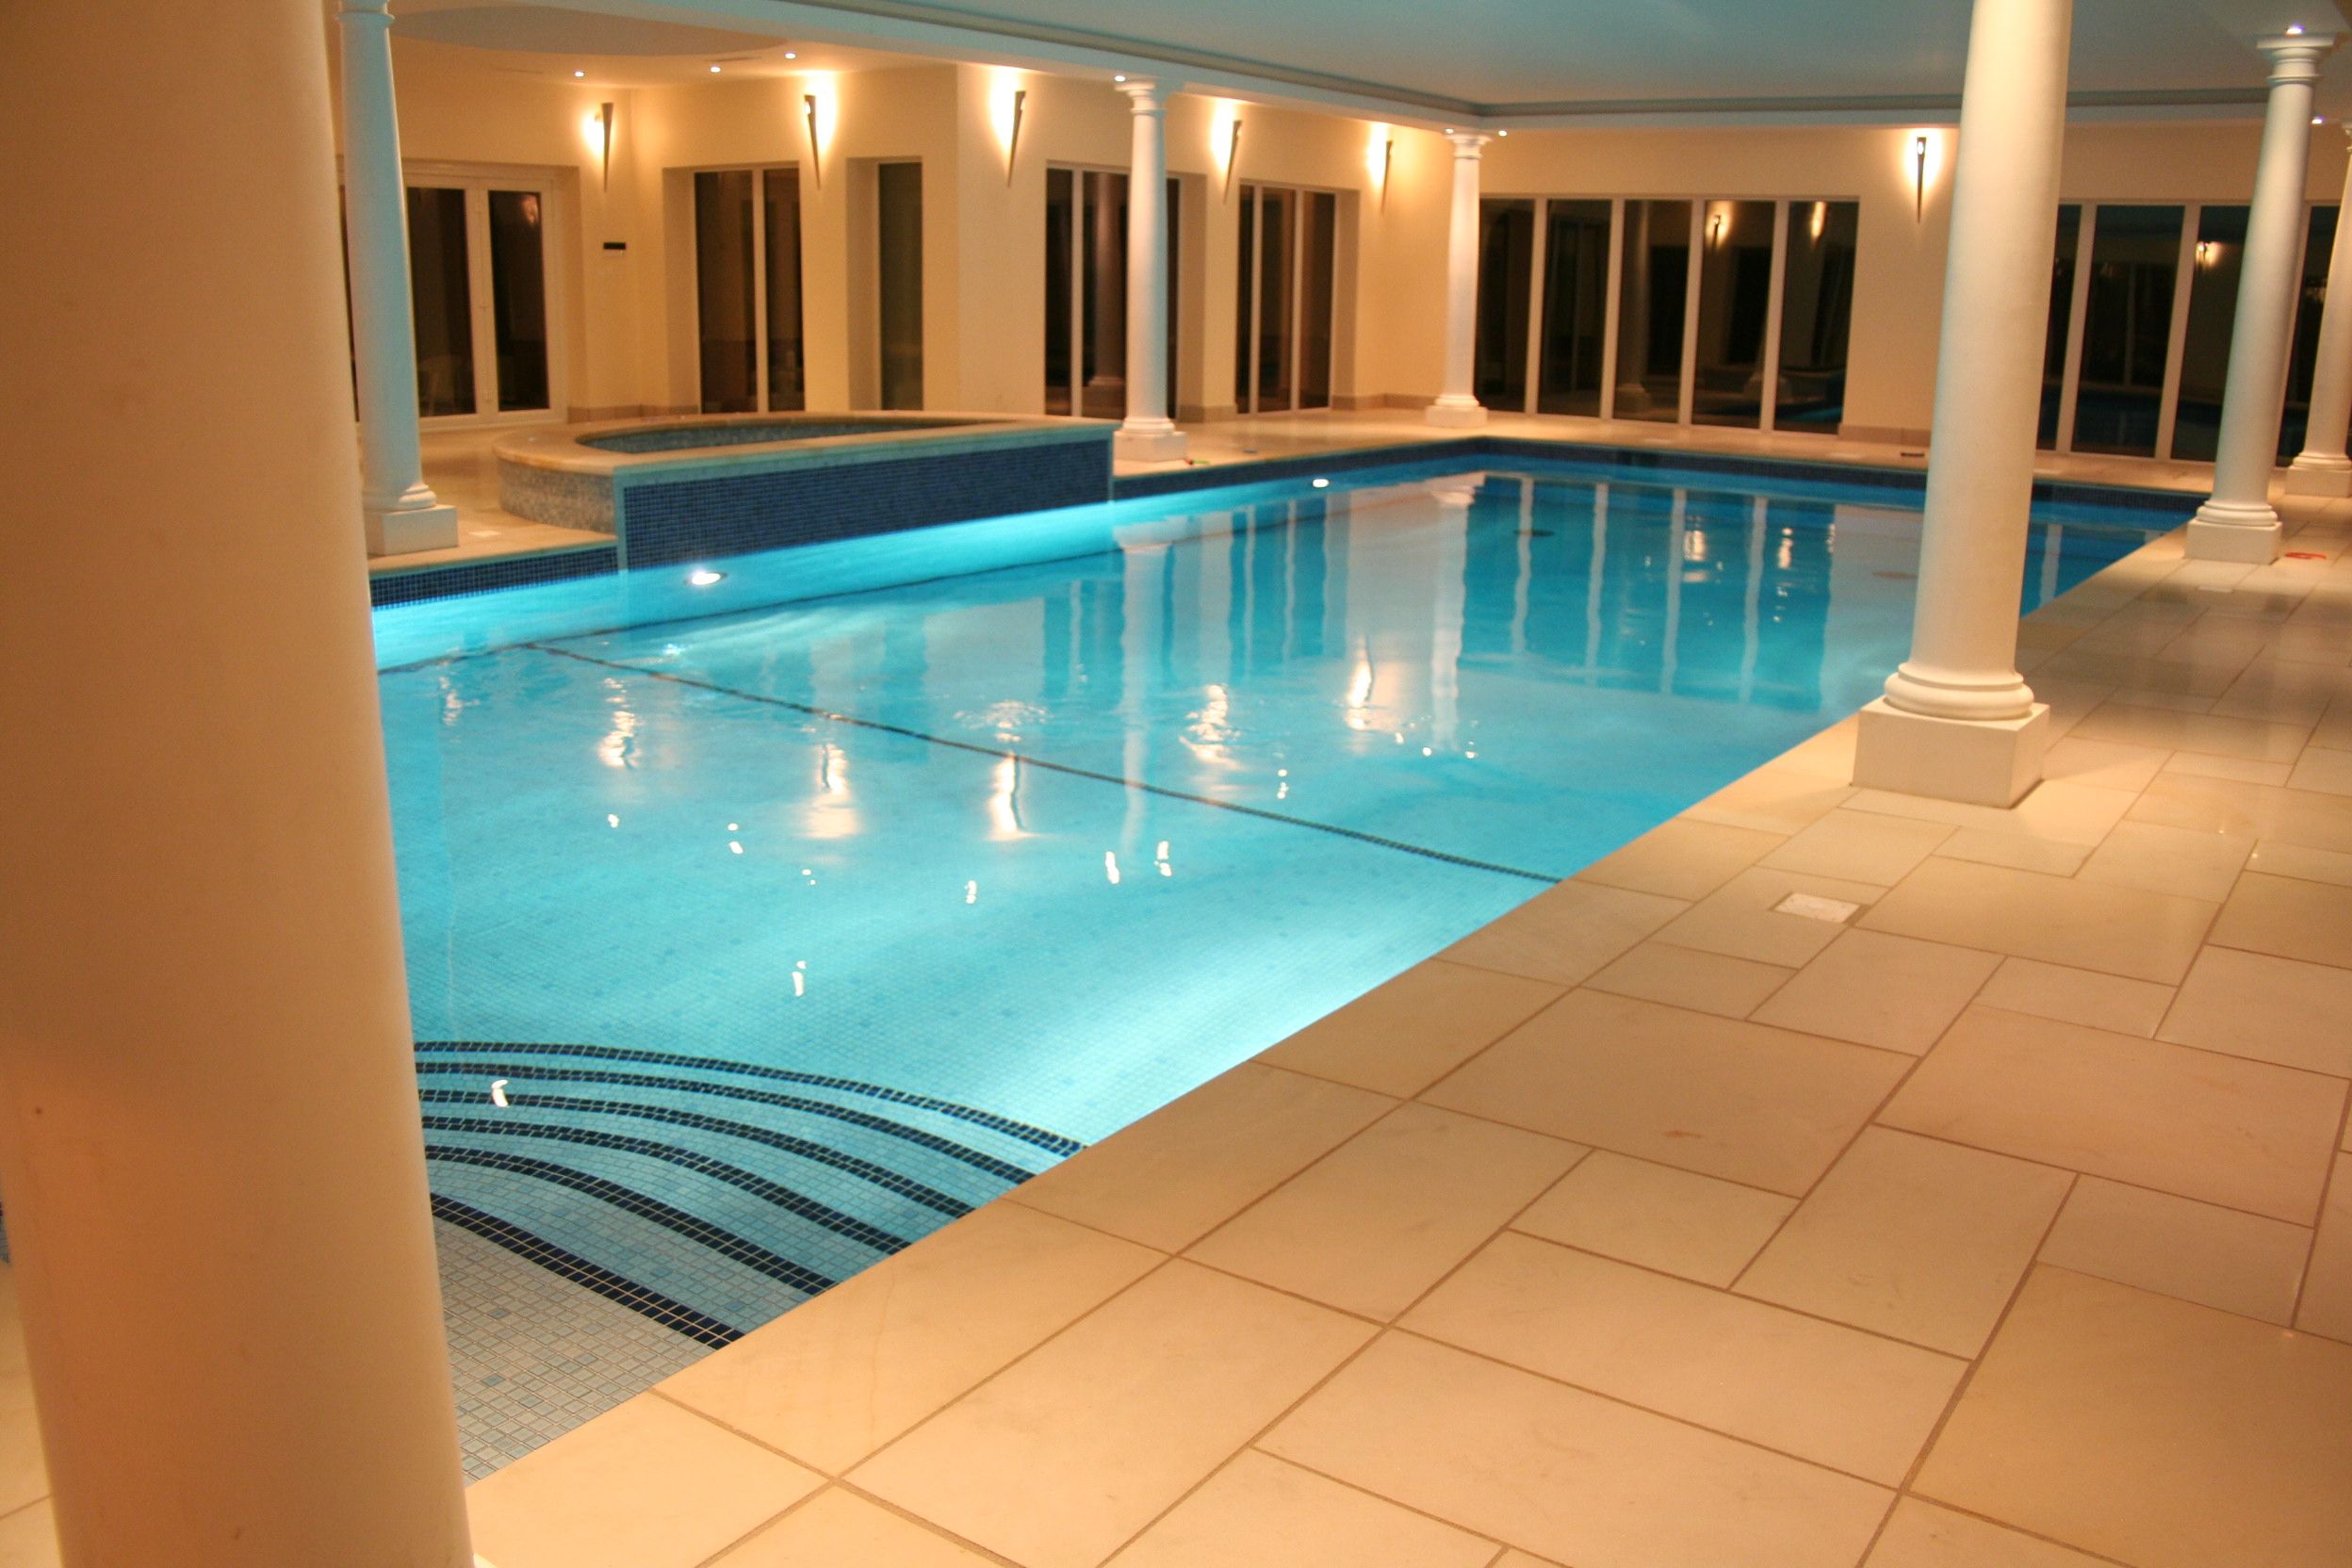 Elegance Indoor Swimming Pool Ideas With Lighting Simple Tile Pure Water And Modern Interior Design  Pool Design